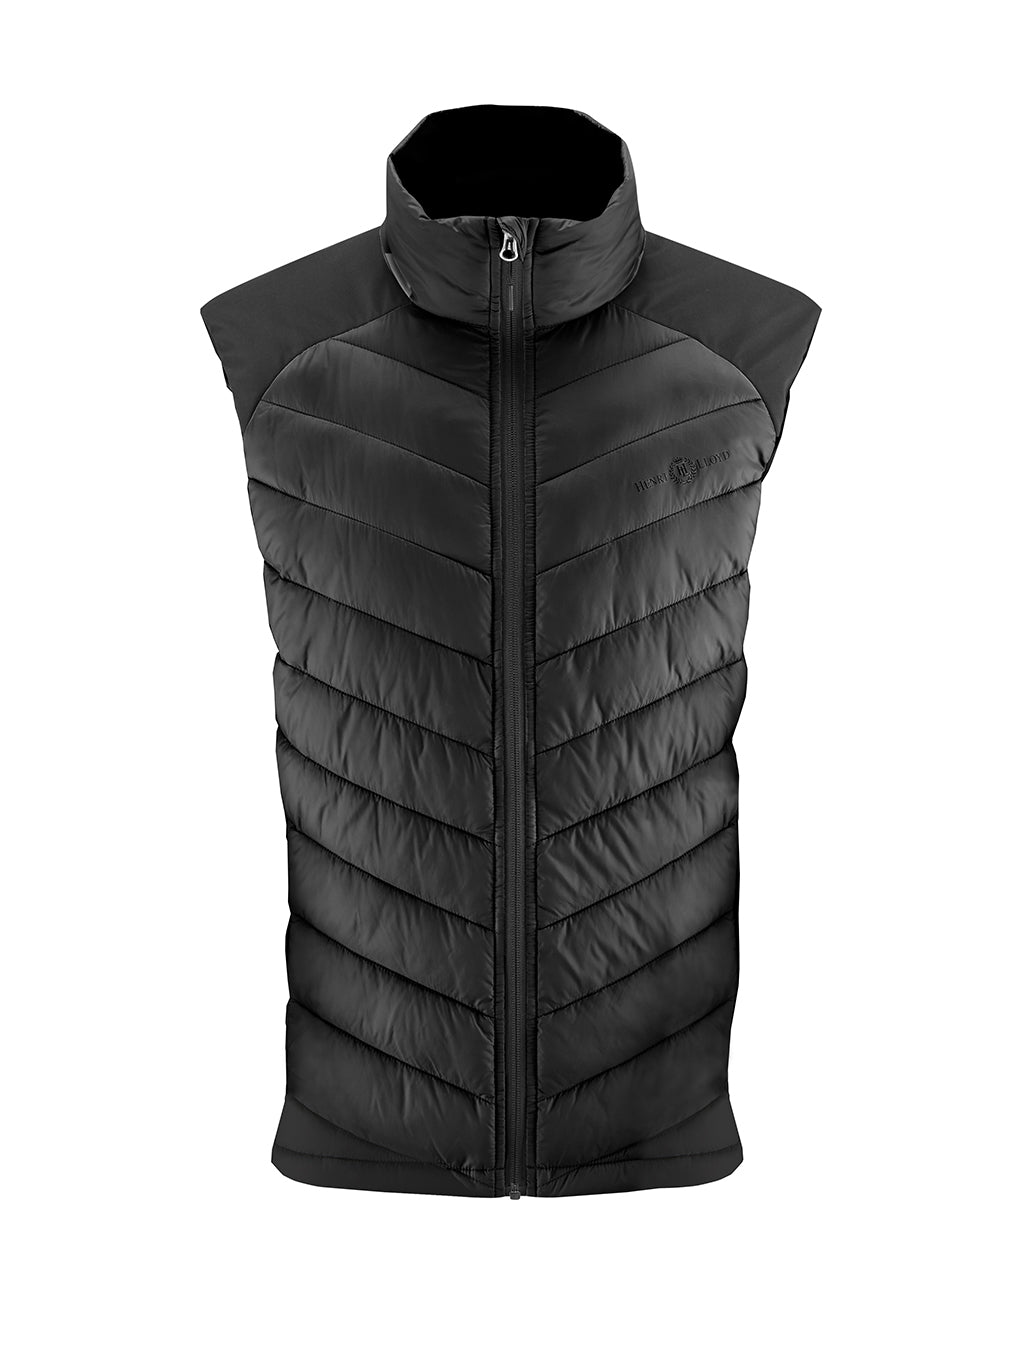 Henri Lloyd Aqua Down Vest - DISCONTINUED STYLE - ONLY SIZE SMALL  LEFT